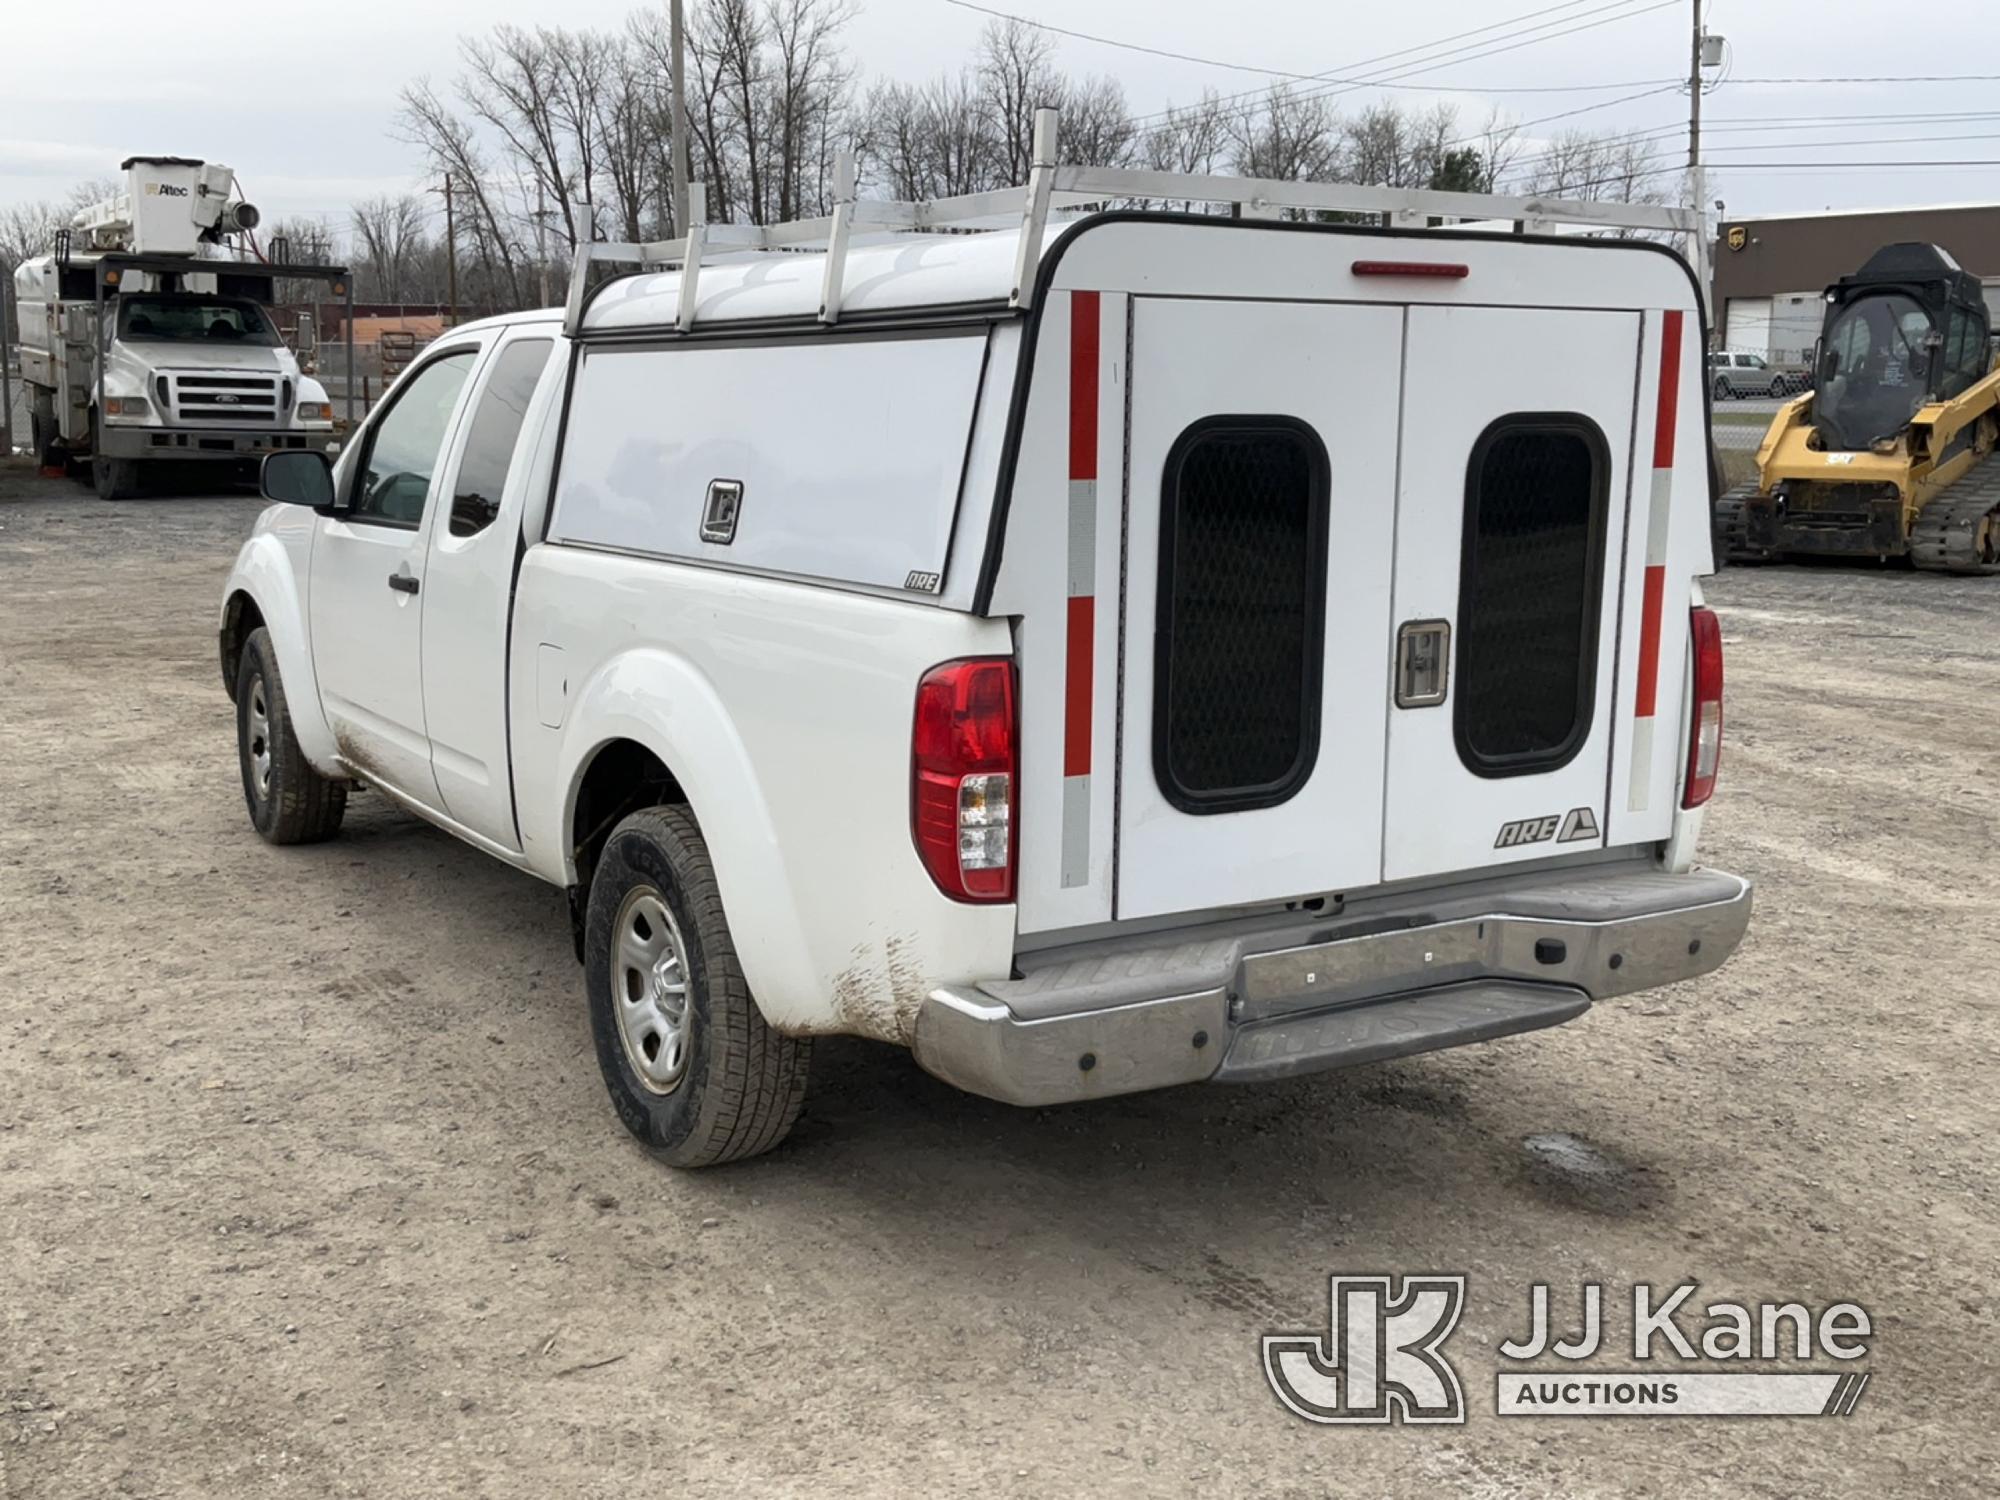 (Rome, NY) 2016 Nissan Frontier Extended-Cab Pickup Truck Runs & Moves, Body & Rust Damage